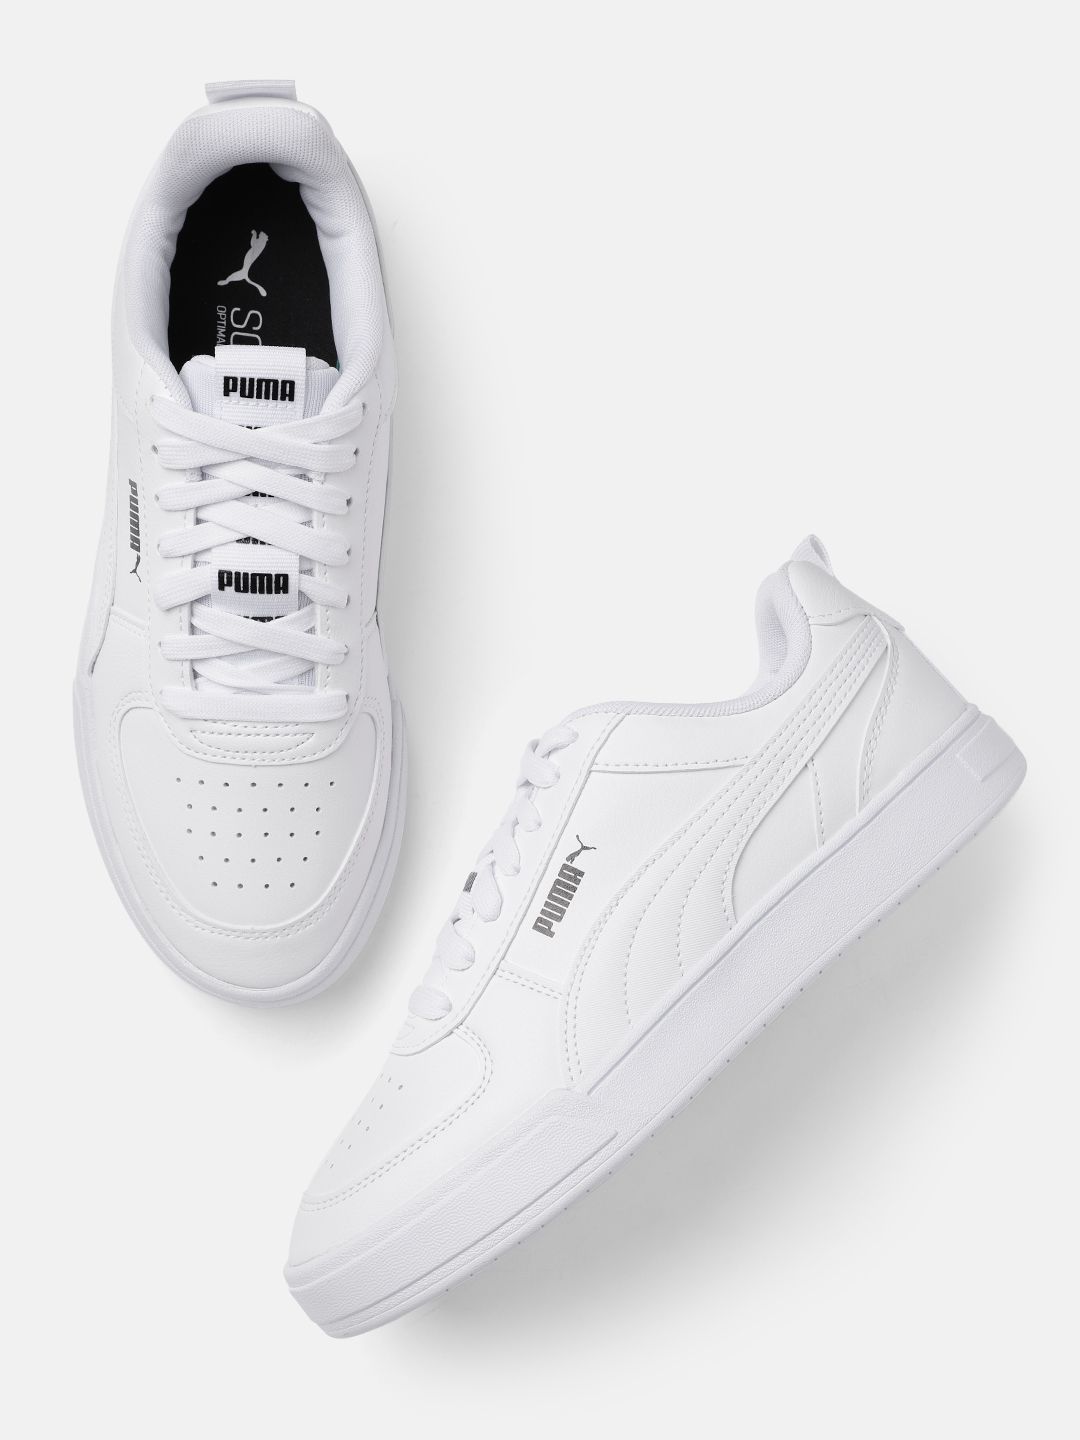 Puma Unisex White Leather Caven Tape SOFTFOAM Sneakers Price in India